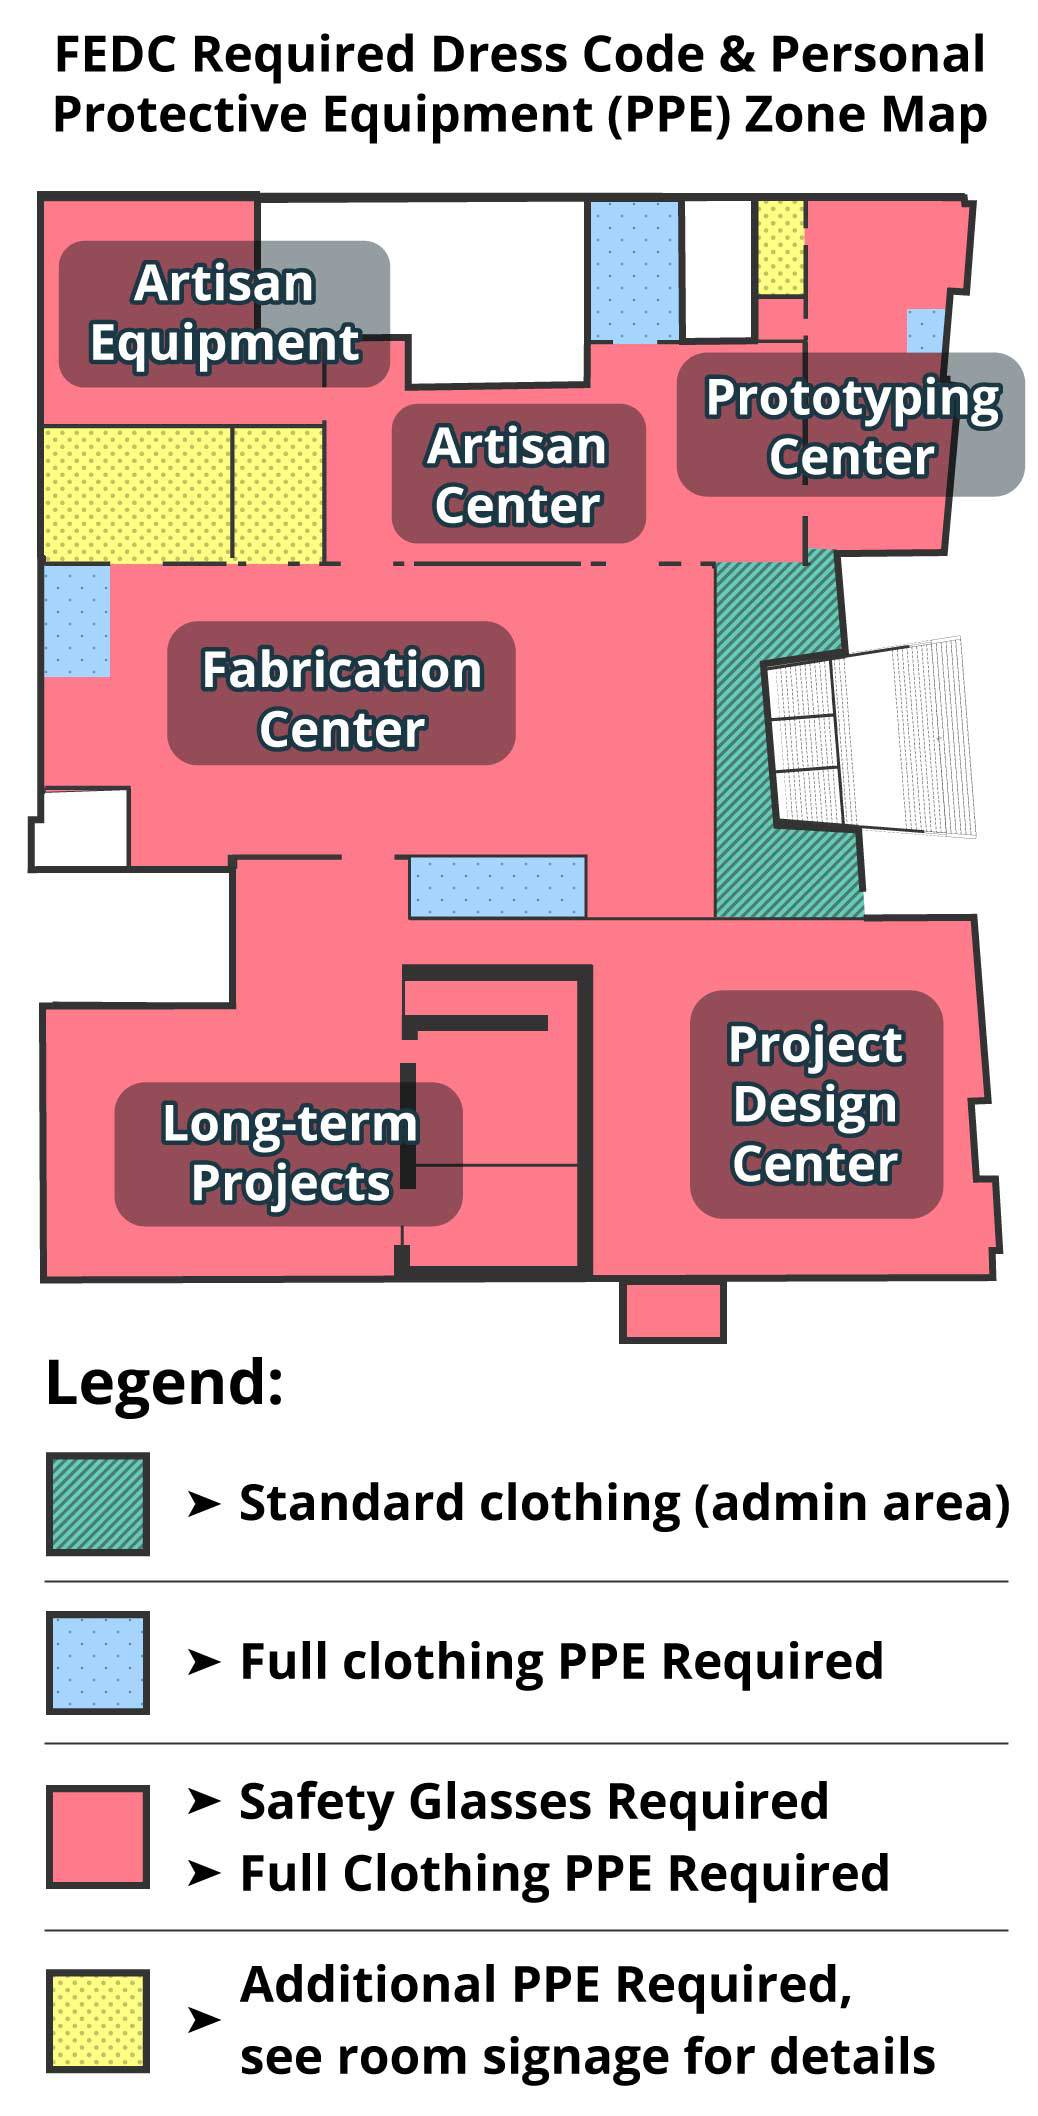 FEDC Required Dress Code &amp; Personal Protective Equipment (PPE) Zone Map - standard clothing is allowed only in the entryway admin area but all other areas in the FEDC require specific dress codes. See room signage when entering each area for clothing requirements.